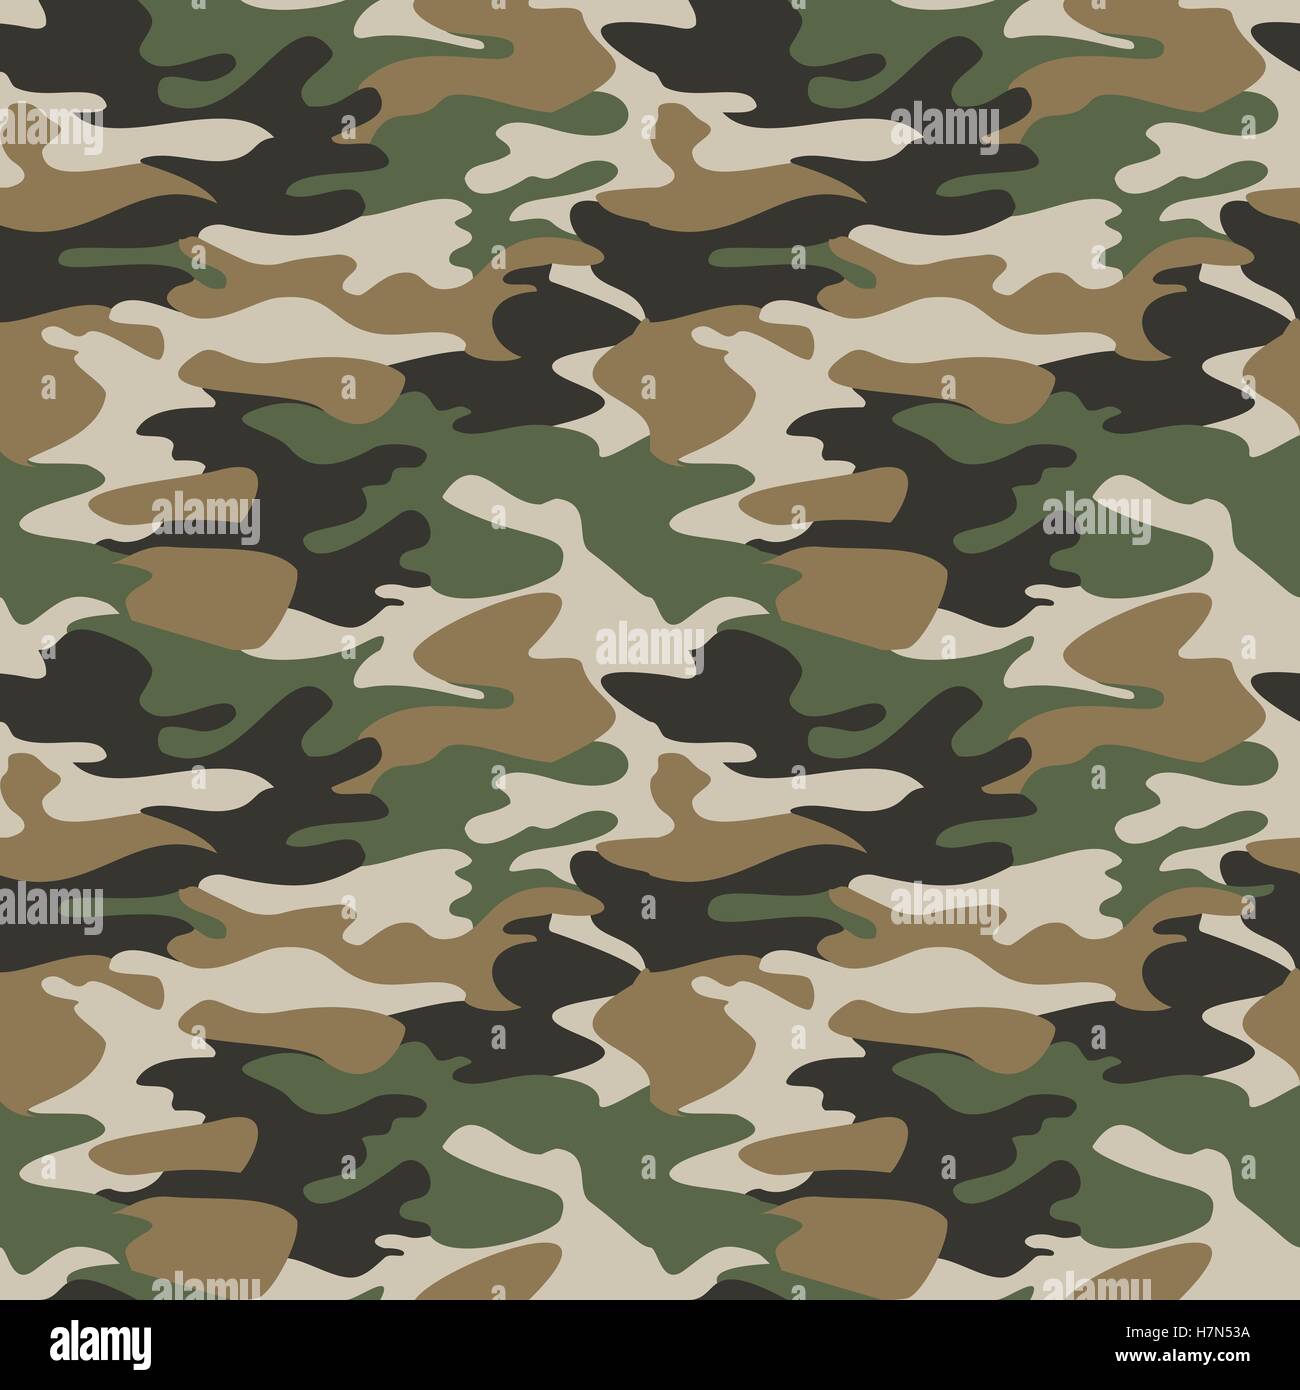 Camouflage pattern background seamless vector. Camo military clothing ...